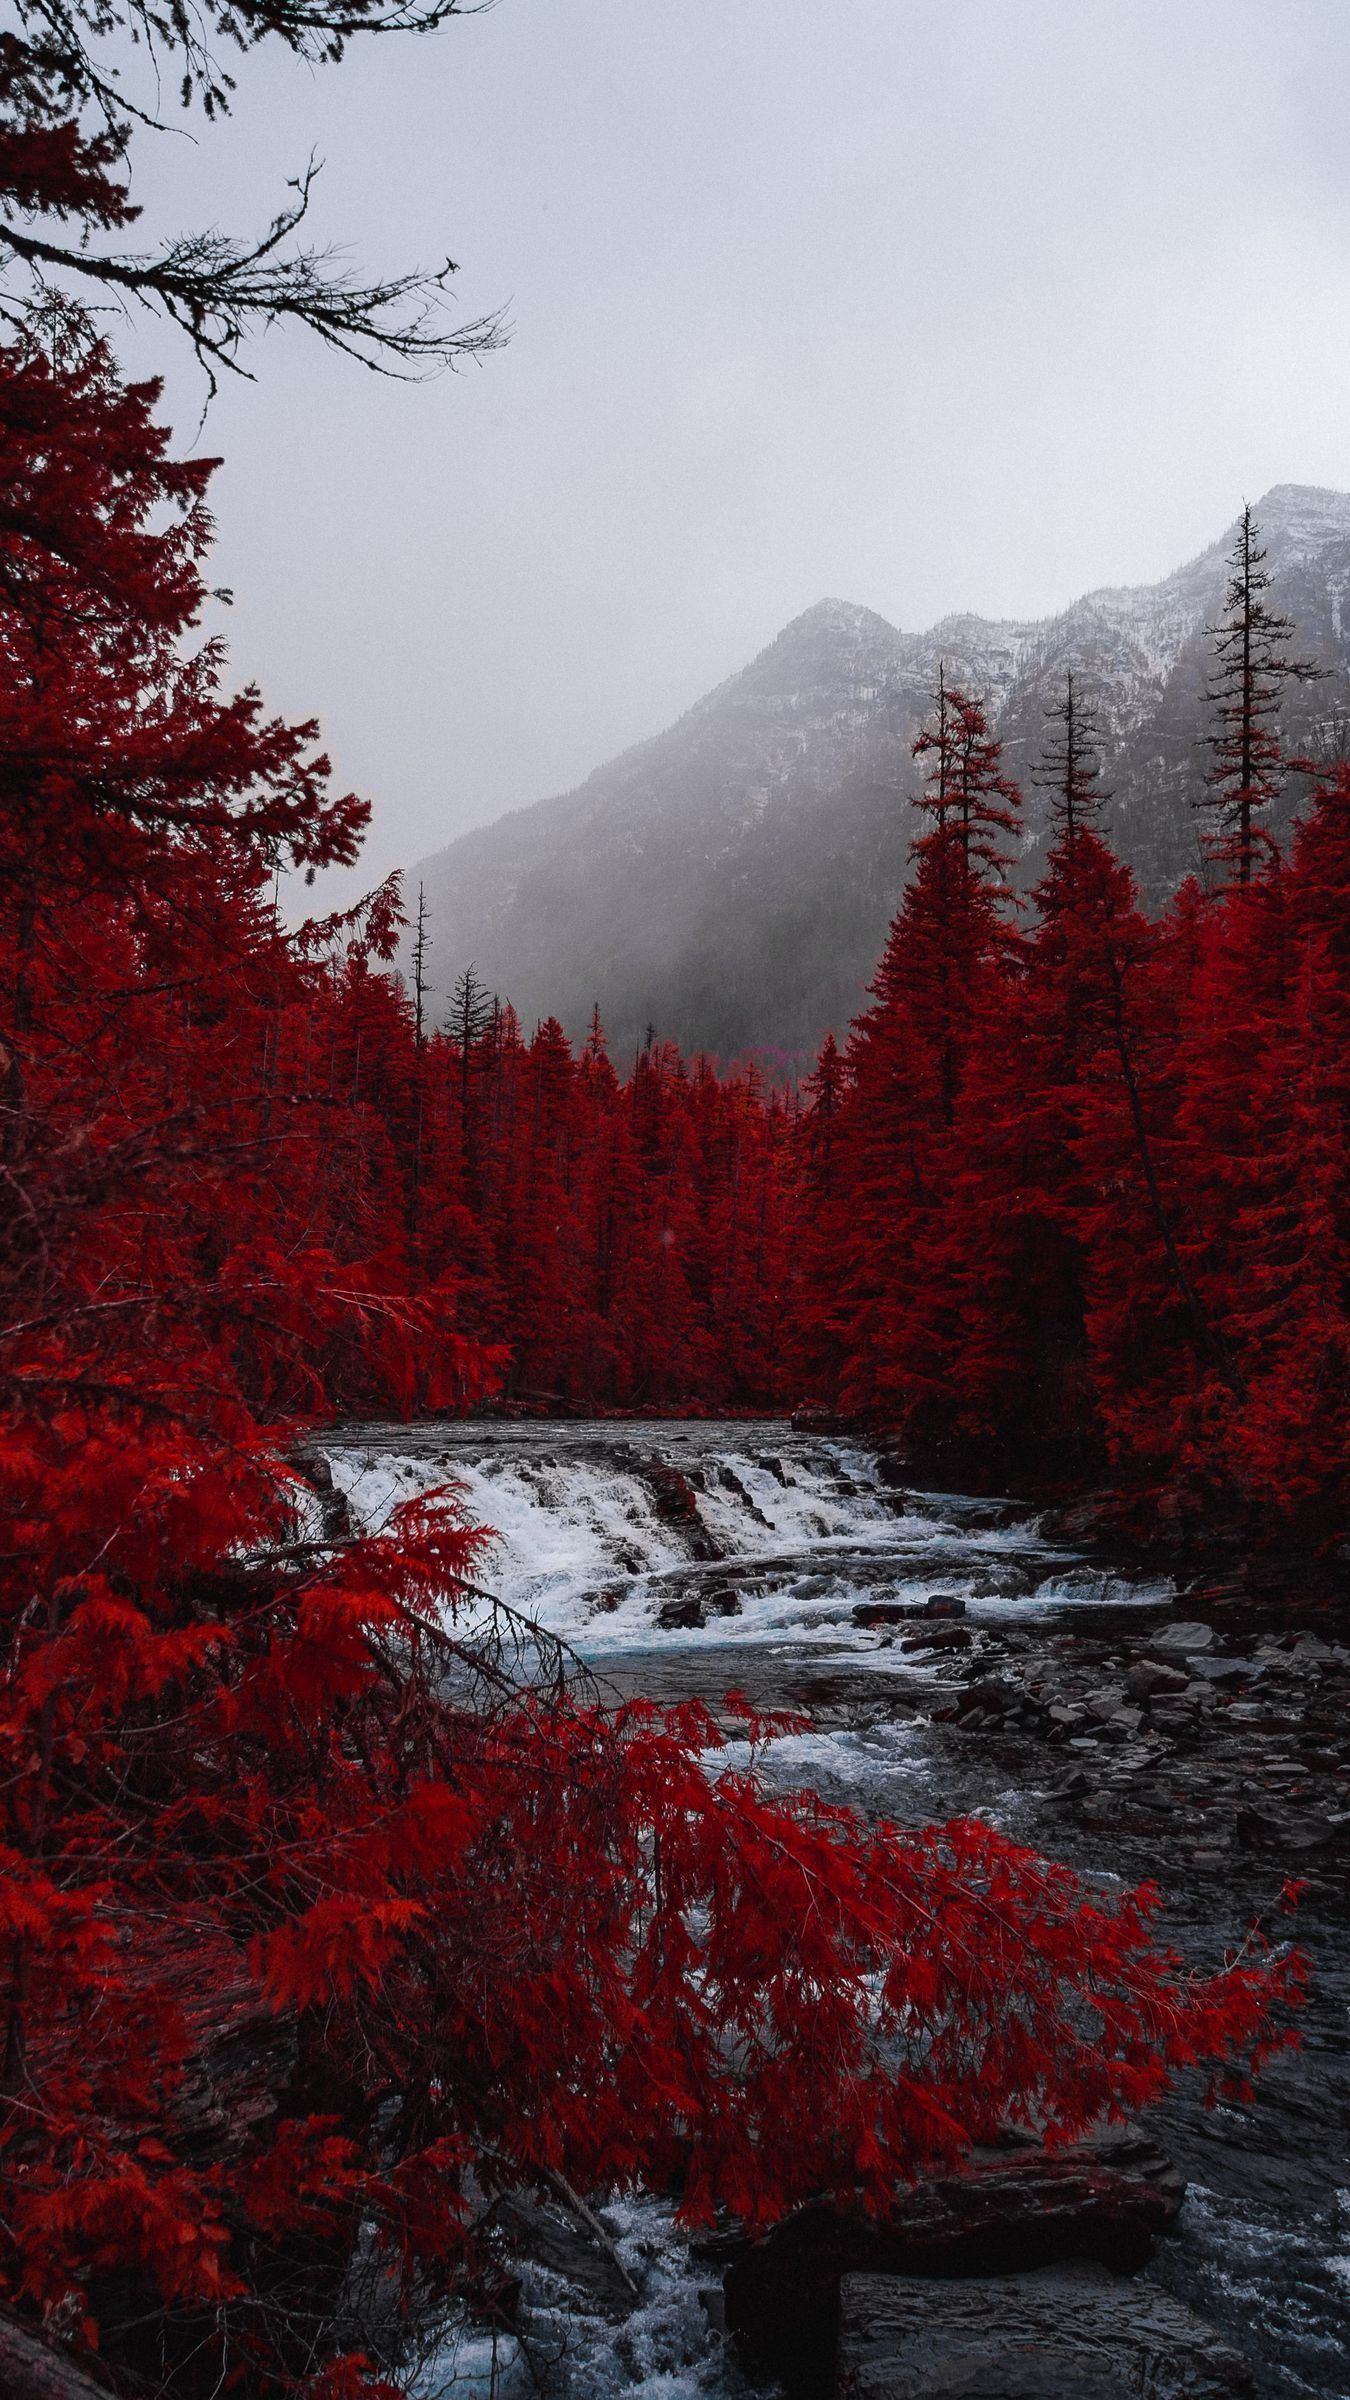 Download wallpaper 1350x2400 river, trees, red, mountains, fog, landscape iphone 8+/7+/6s+/for parallax HD background